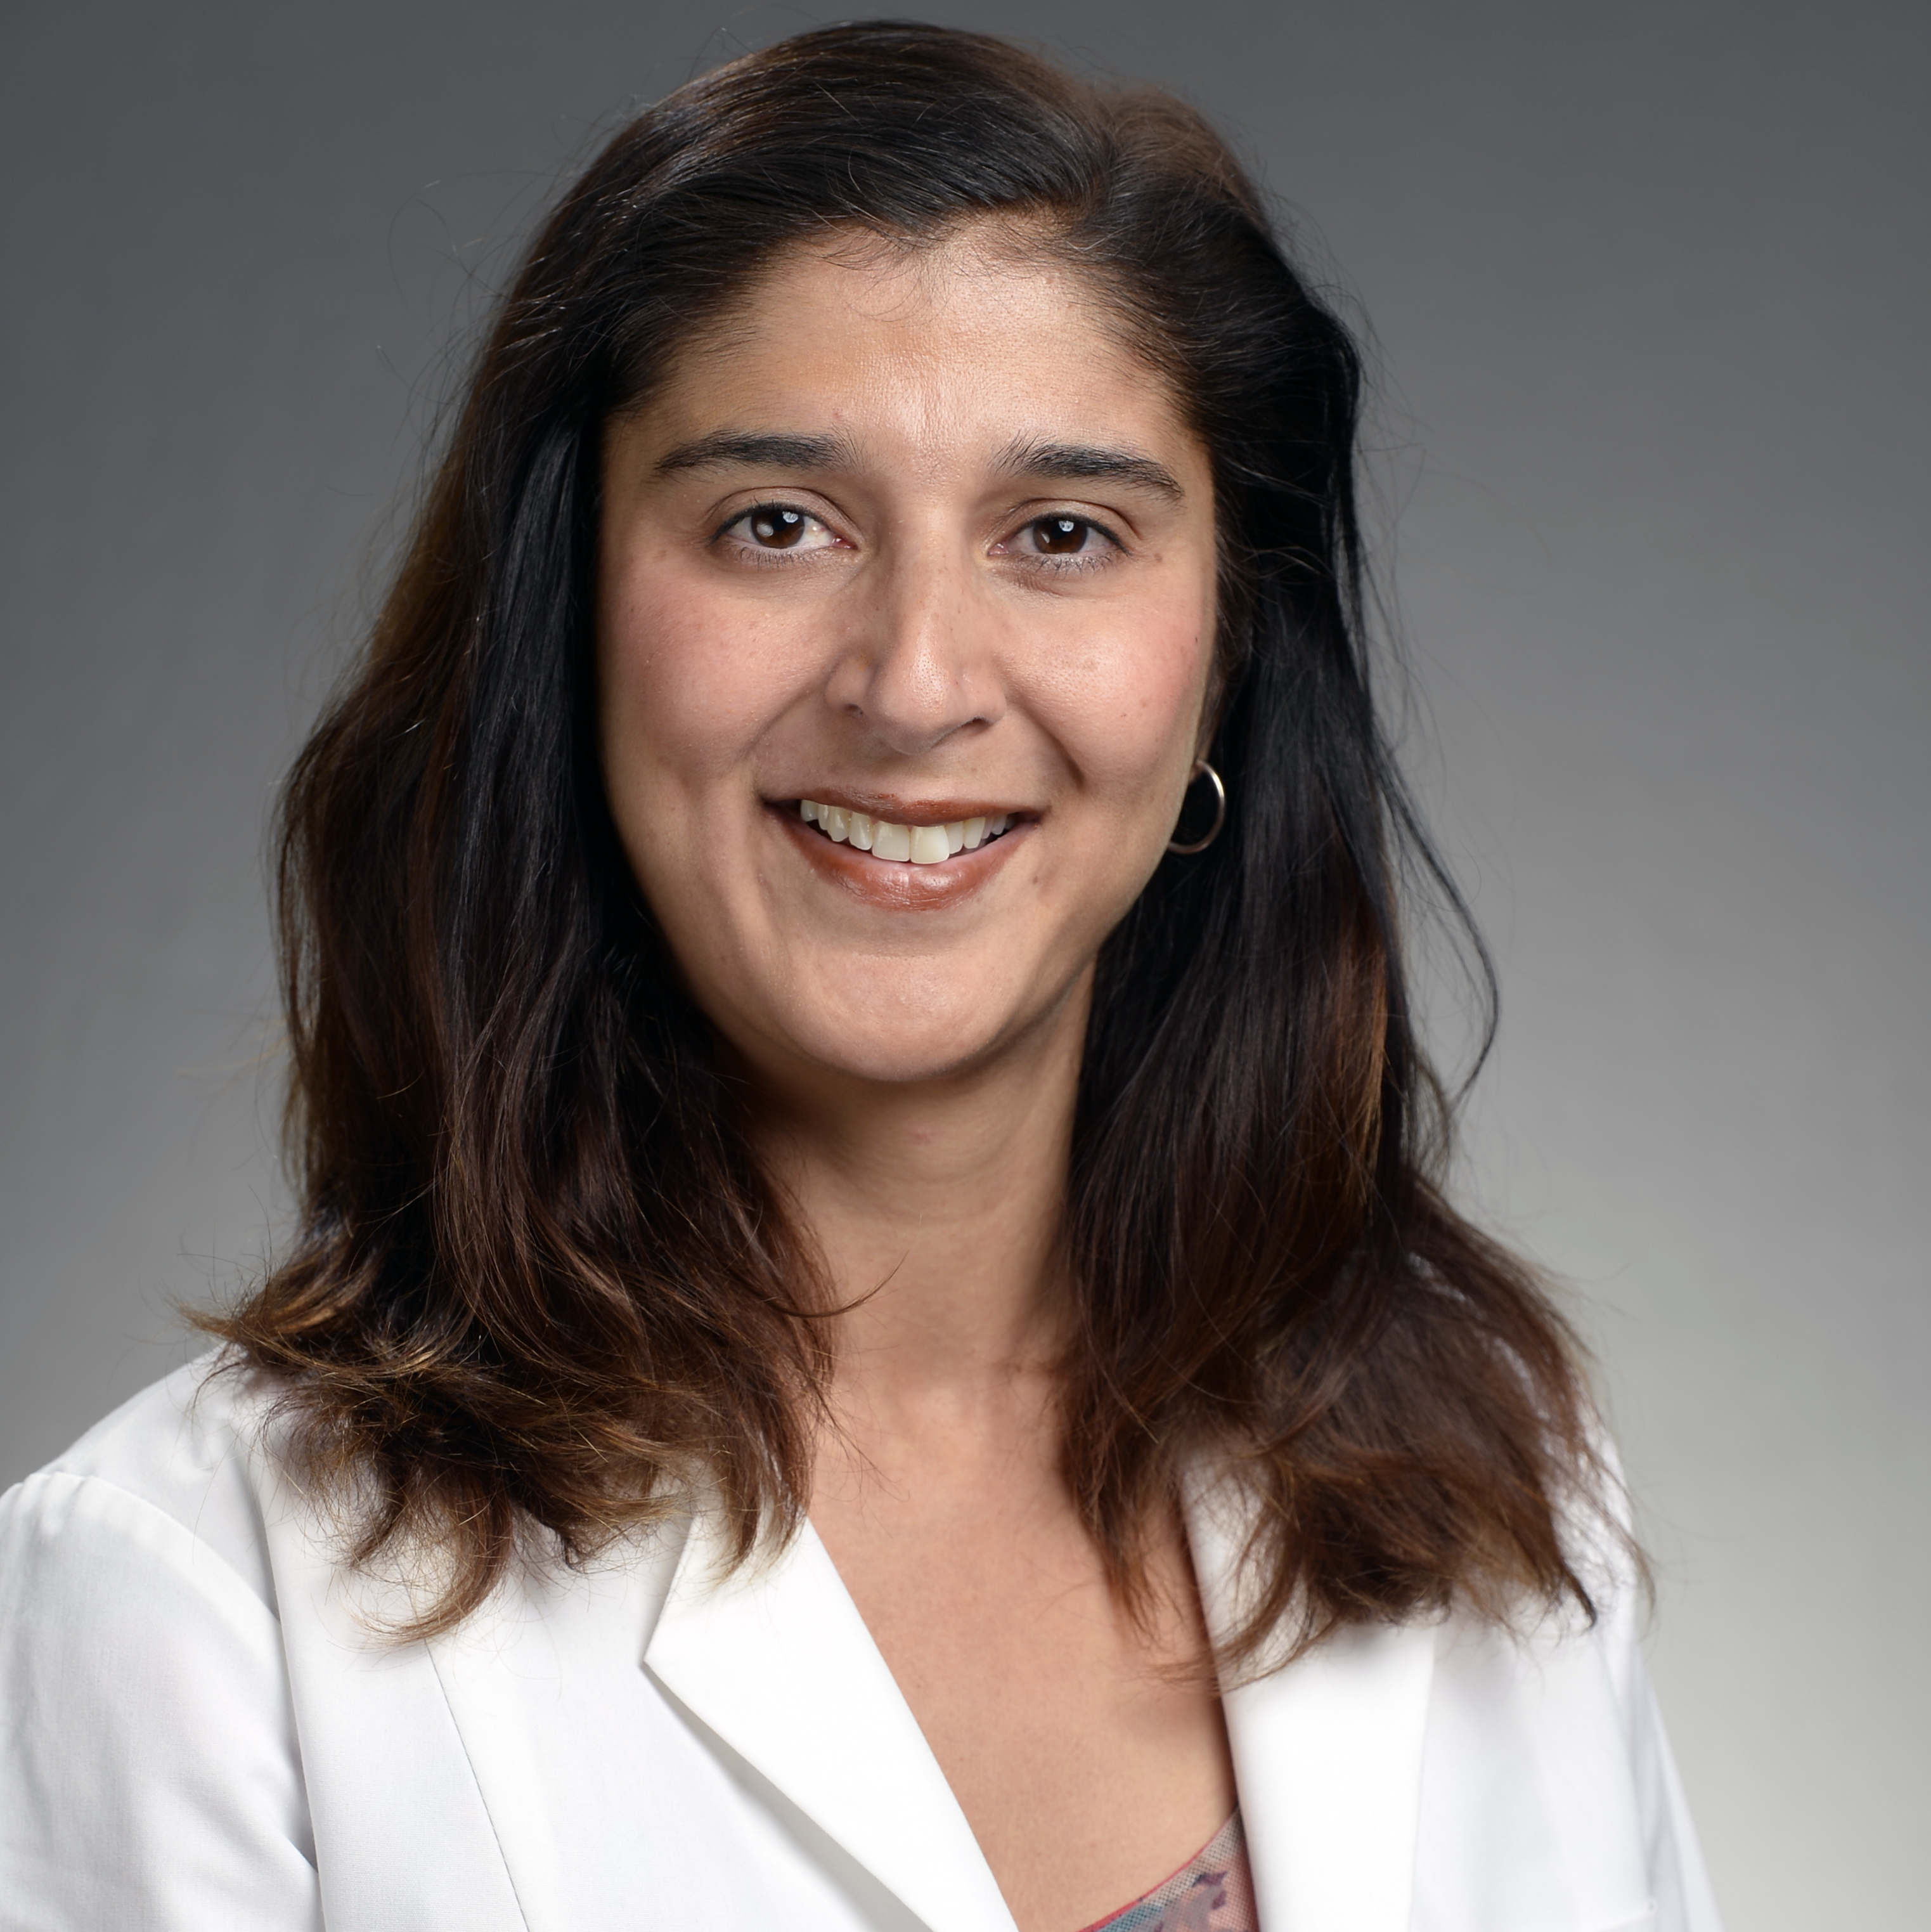 A headshot of Dimple Bhasin, MD